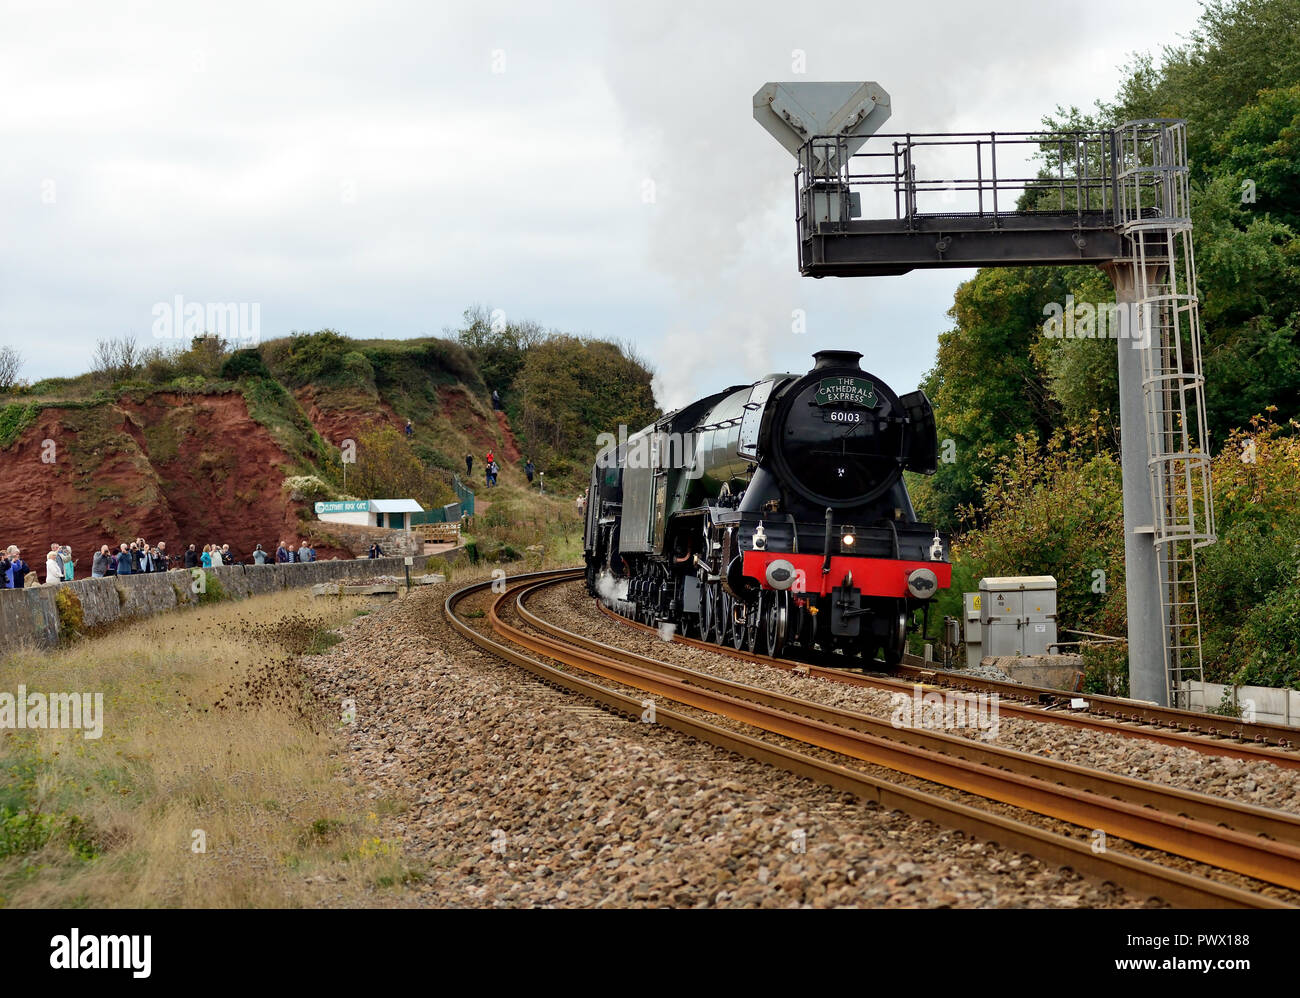 Celebrity LNER Class A3 Pacific No 60103 Flying Scotsman passing crowds at Langstone Rock, with the Cathedrals Express to Bristol, 8th October 2018. Stock Photo